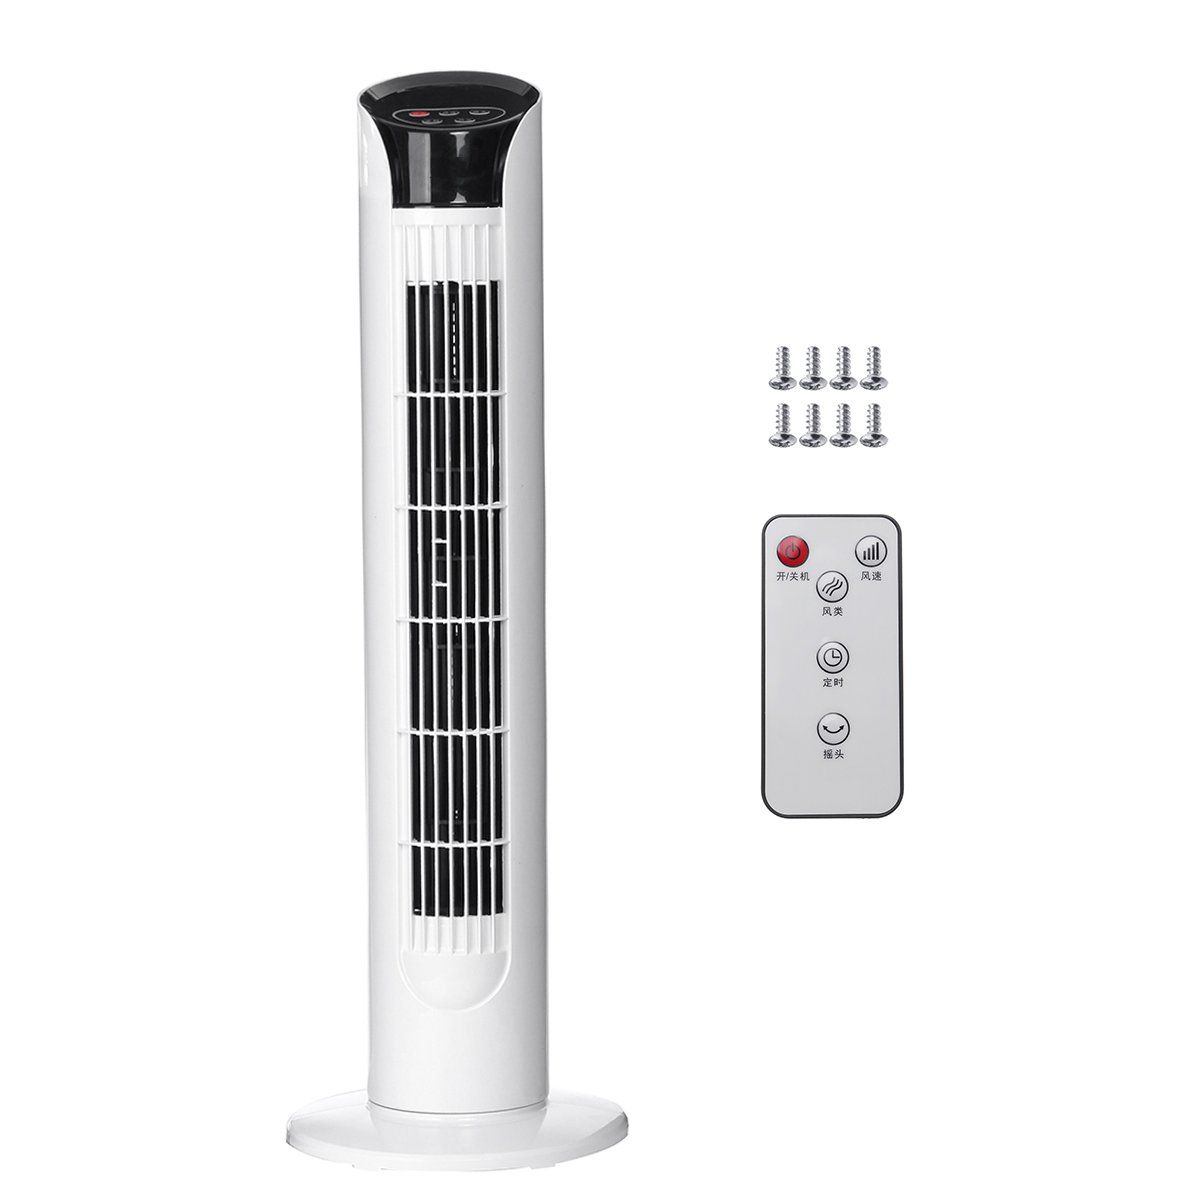 220V-40W-Tower-Type-Three-speed-Bladeless-Electric-Cooling-Fan-08M-Remote-Control-For-Home-Room-1481016